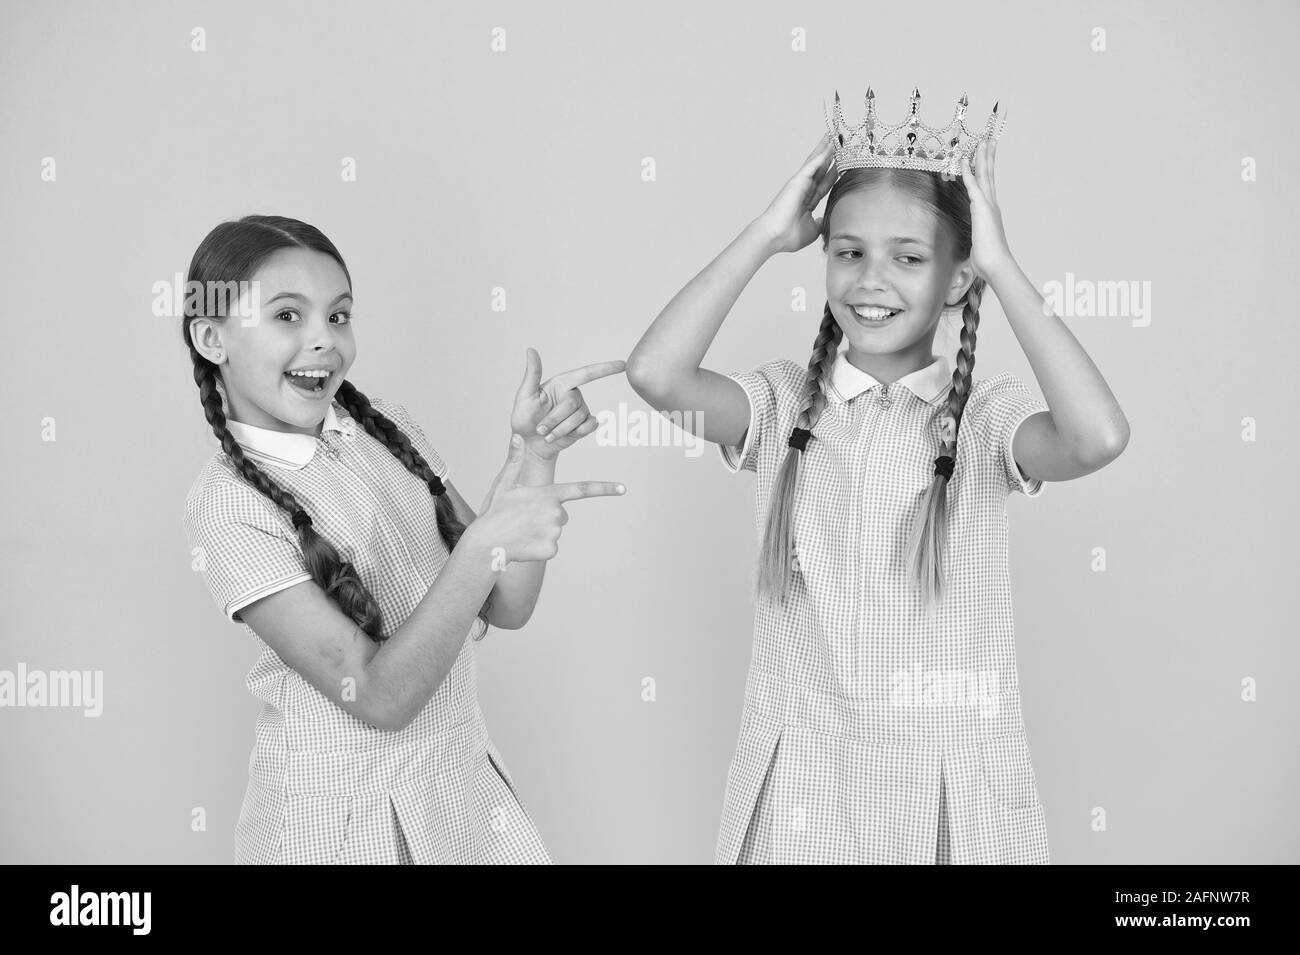 Succeed in education. Celebrating success. She is the best. Happy schoolgirls and golden crown symbol of success. Success and respect. Little princess. Motivational award for school children. Stock Photo